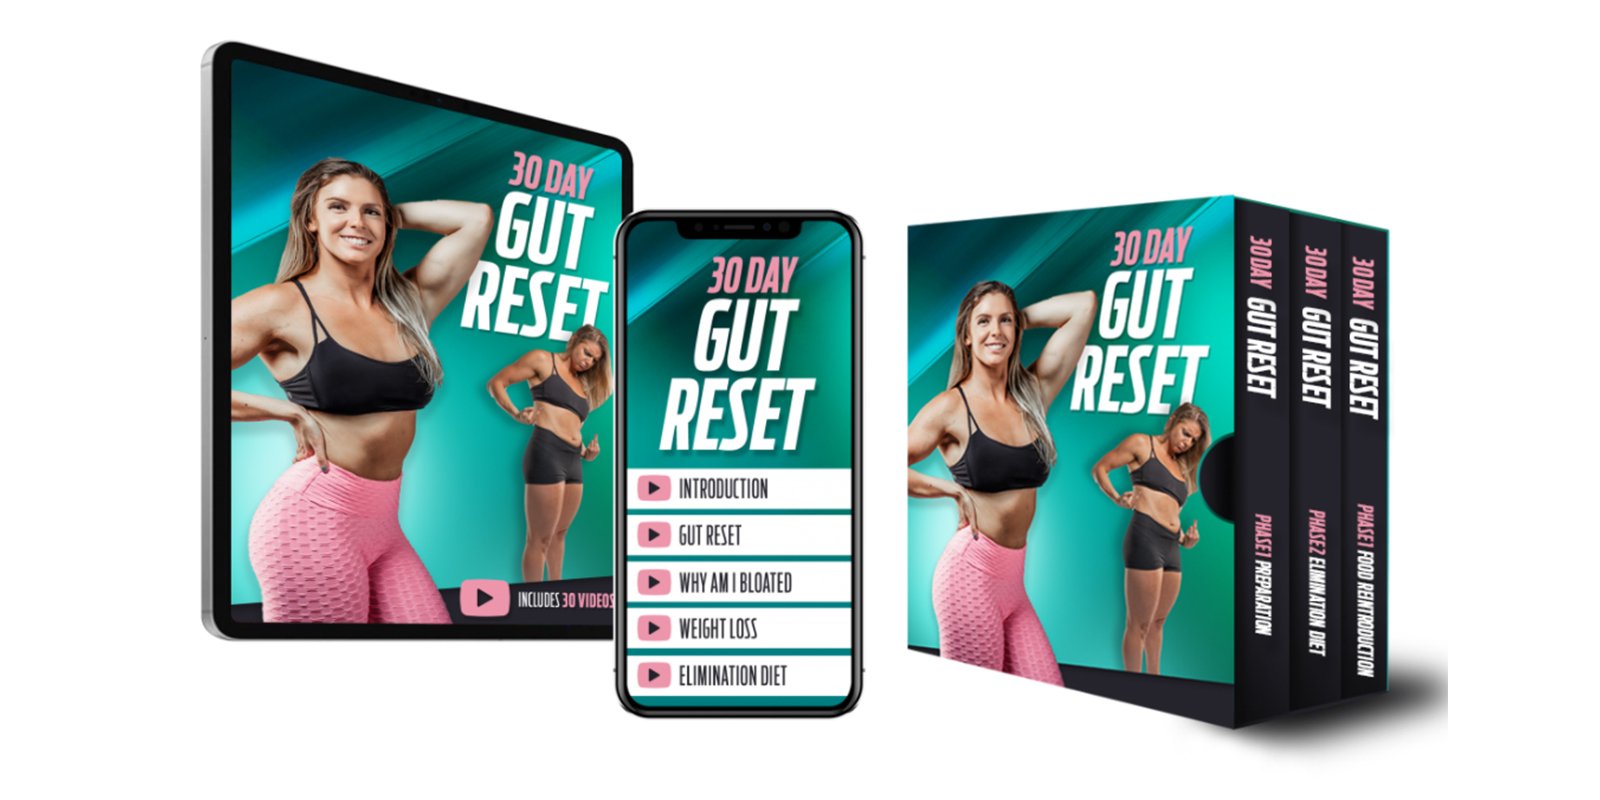 30 Day Gut Reset Review